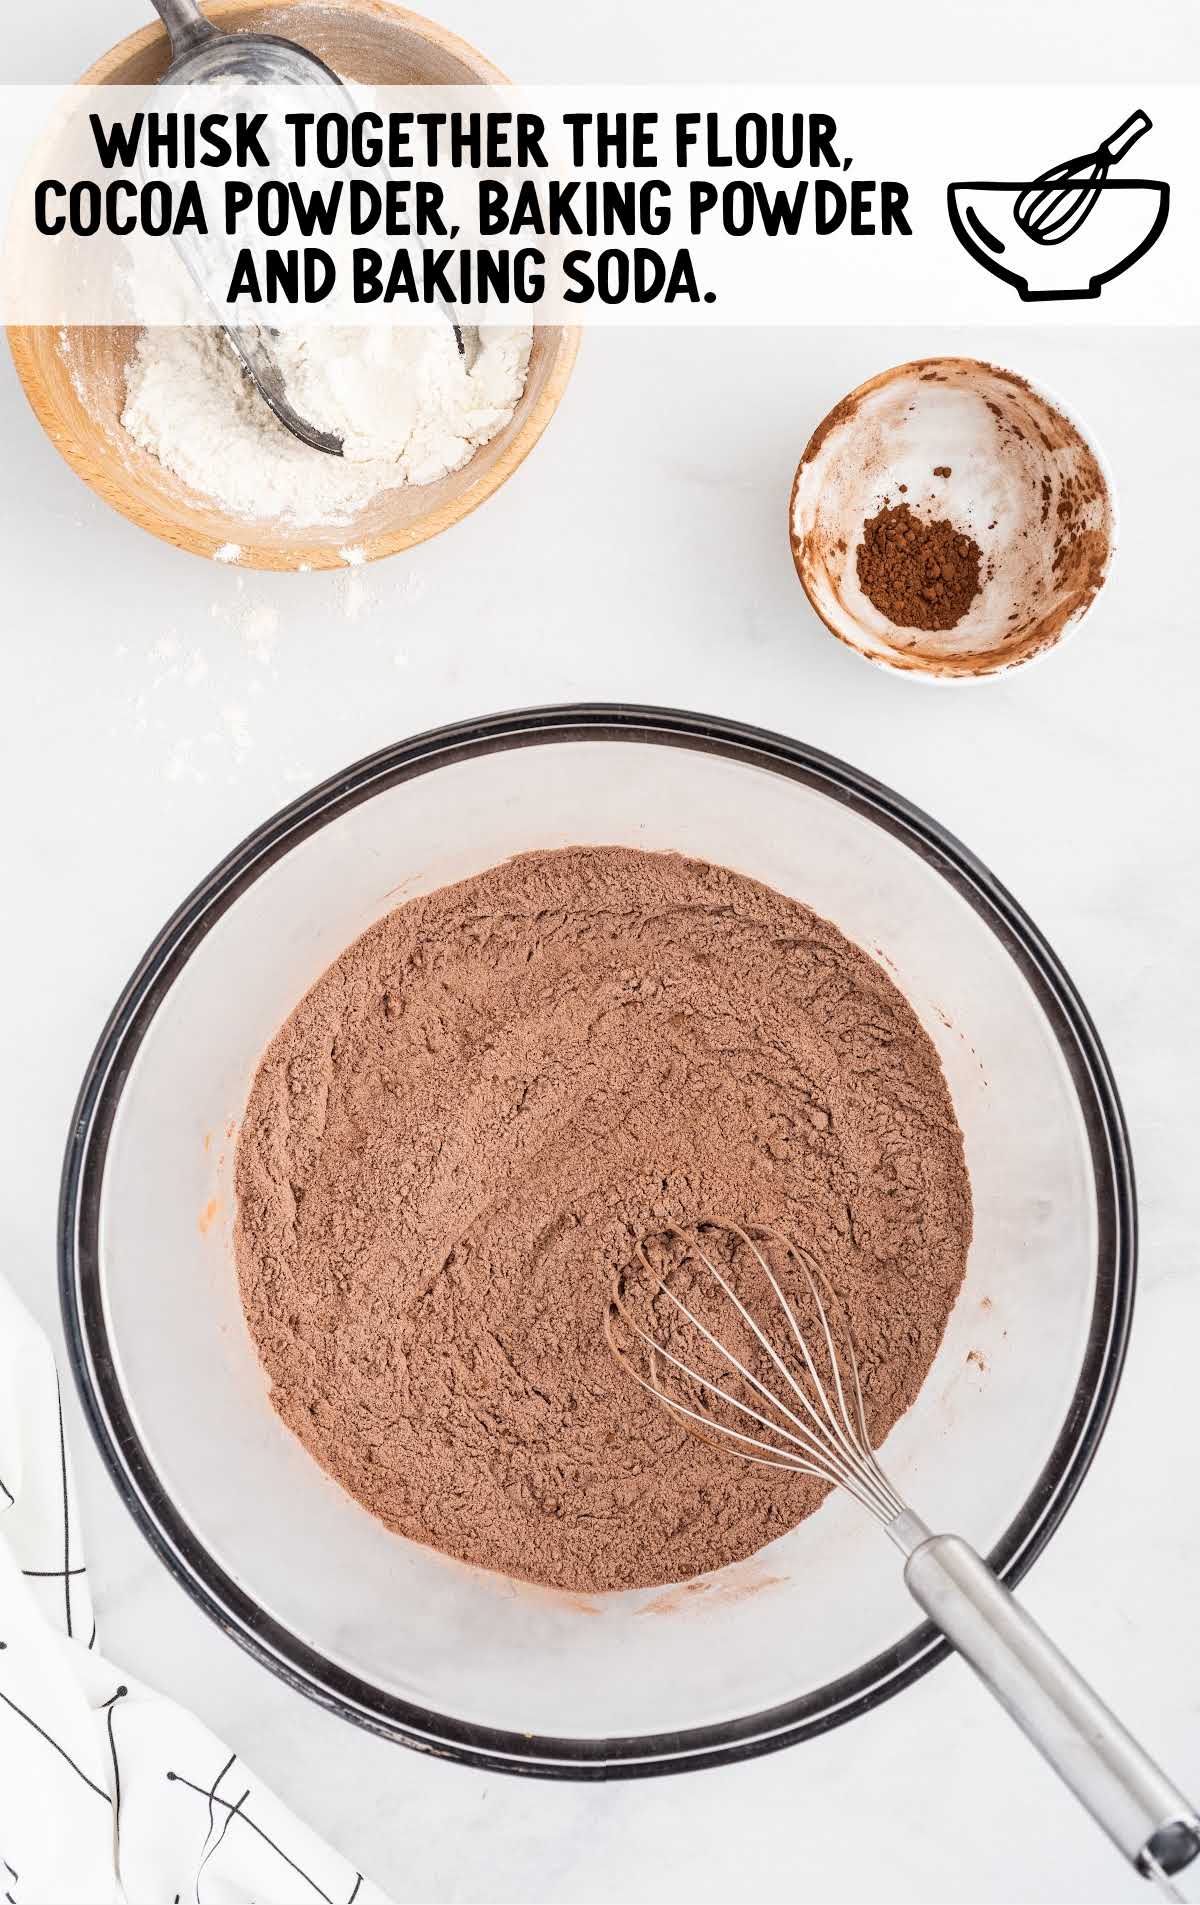 flour, cocoa powder, baking powder, and  baking soda whisked together in a bowl